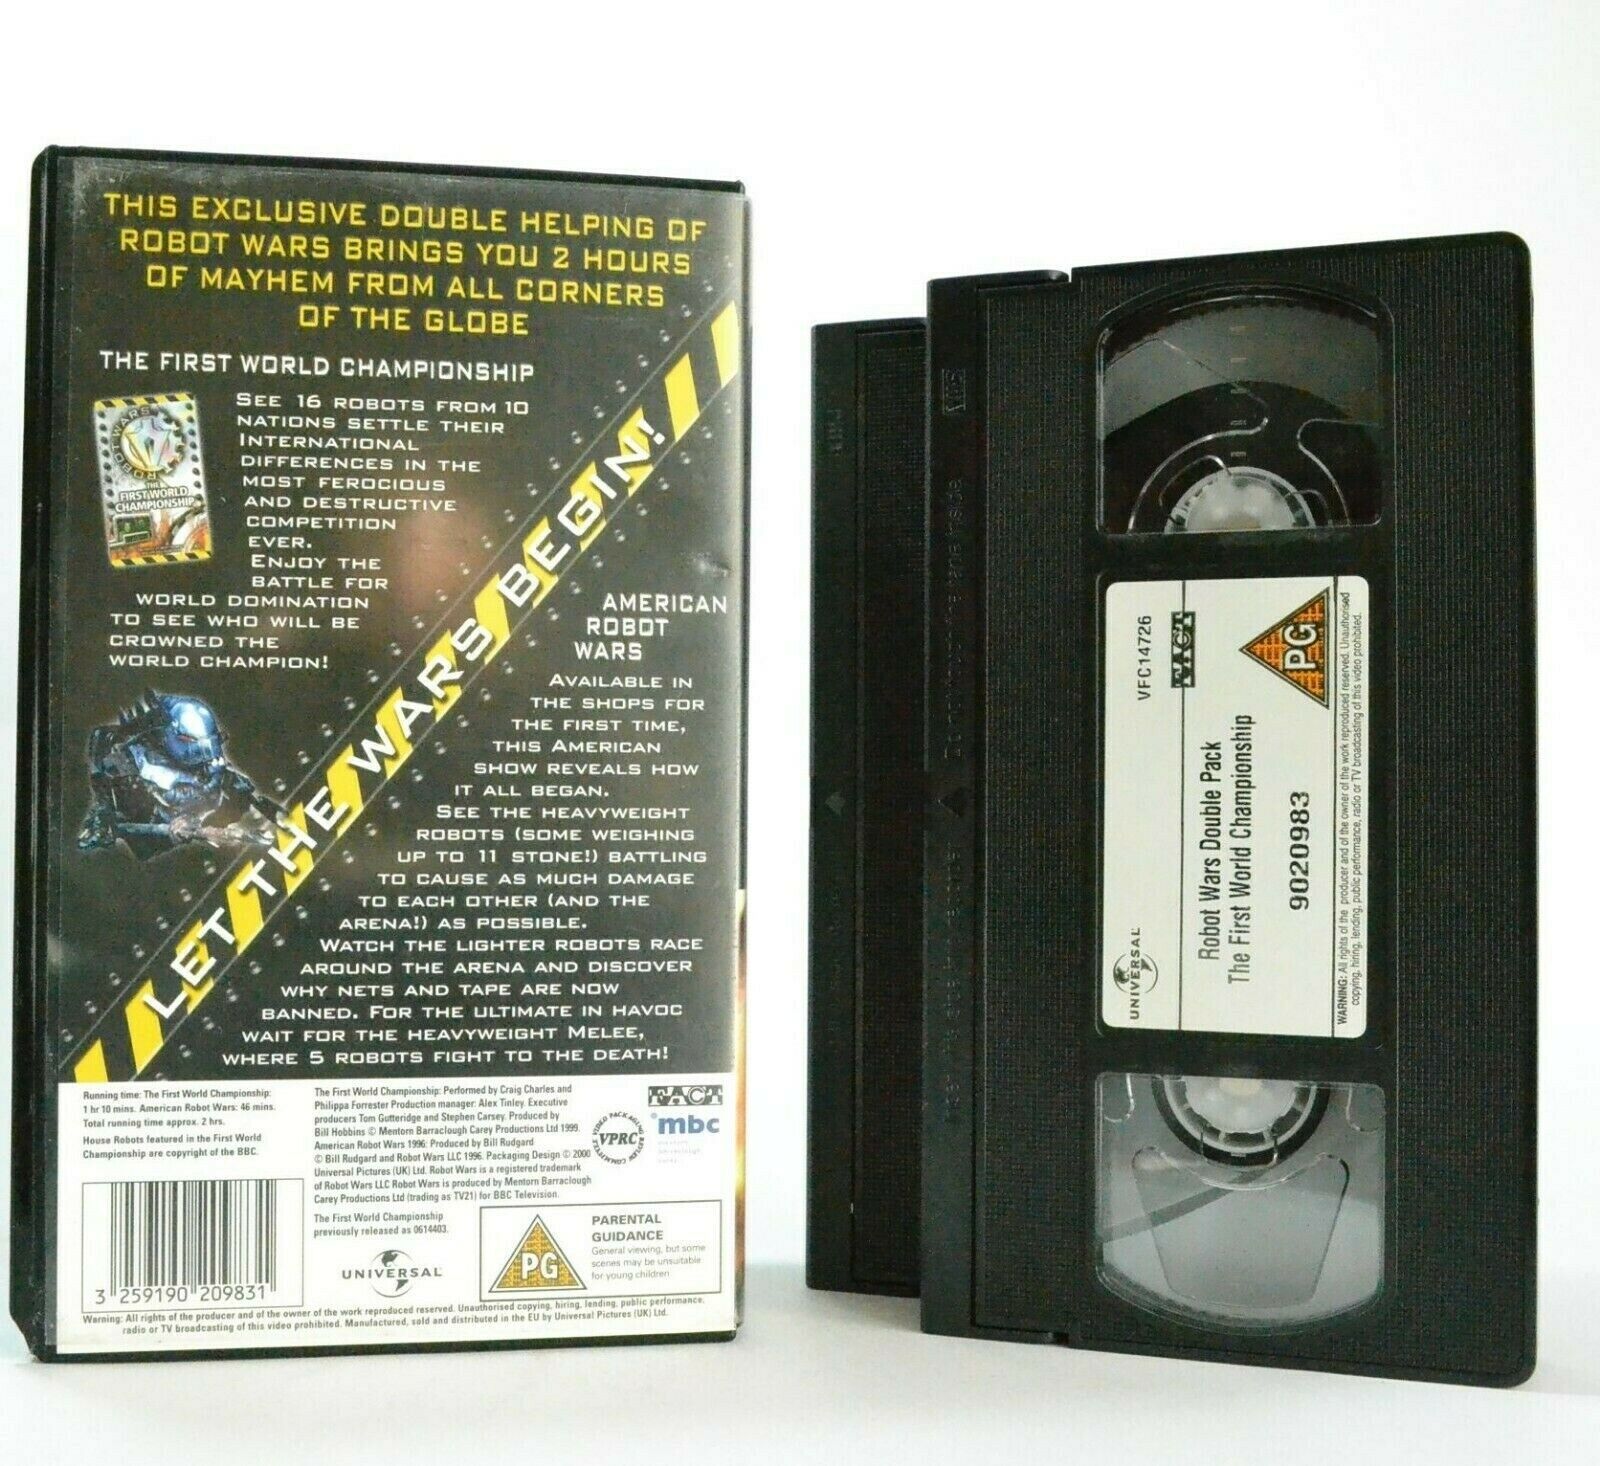 Robots Wars: Double Pack - Special Edition - Mayhem Entertainment - Pal VHS-